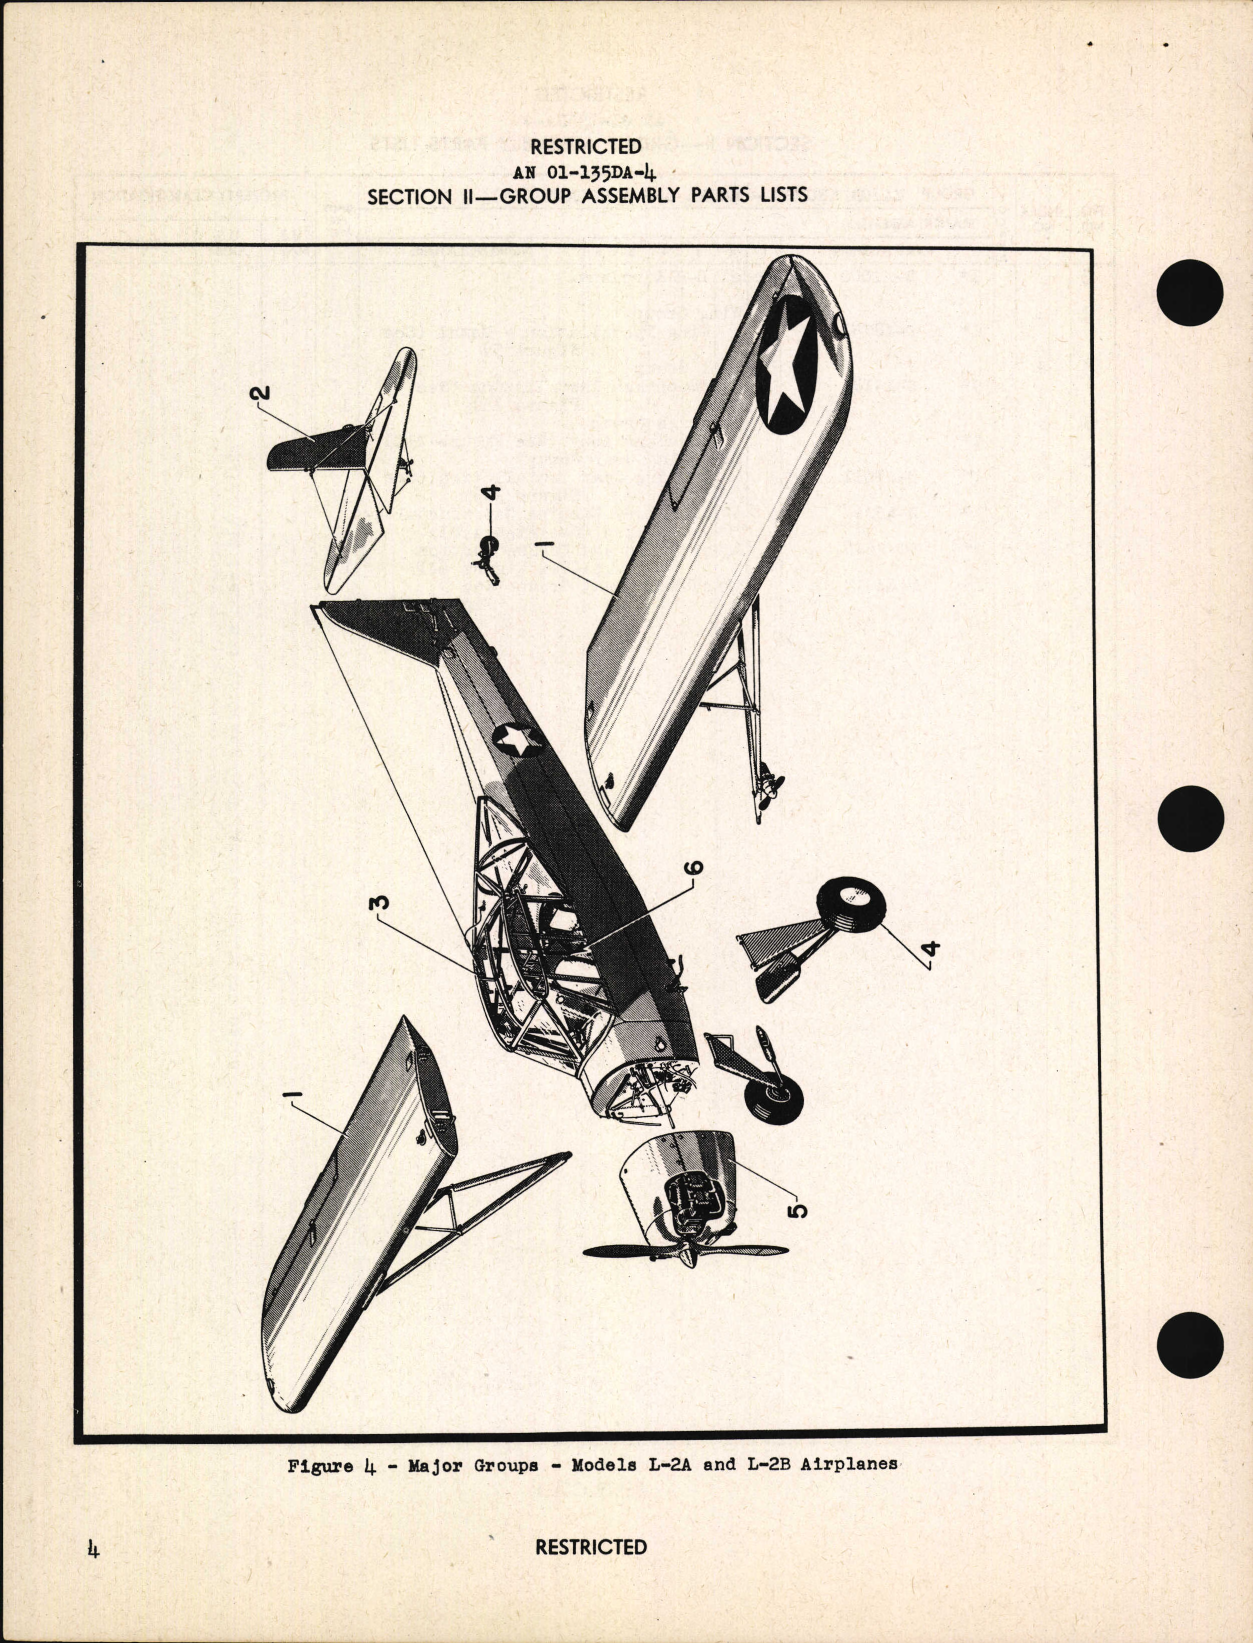 Sample page 8 from AirCorps Library document: Parts Catalog for Models L-2, L-2A, and L-2B